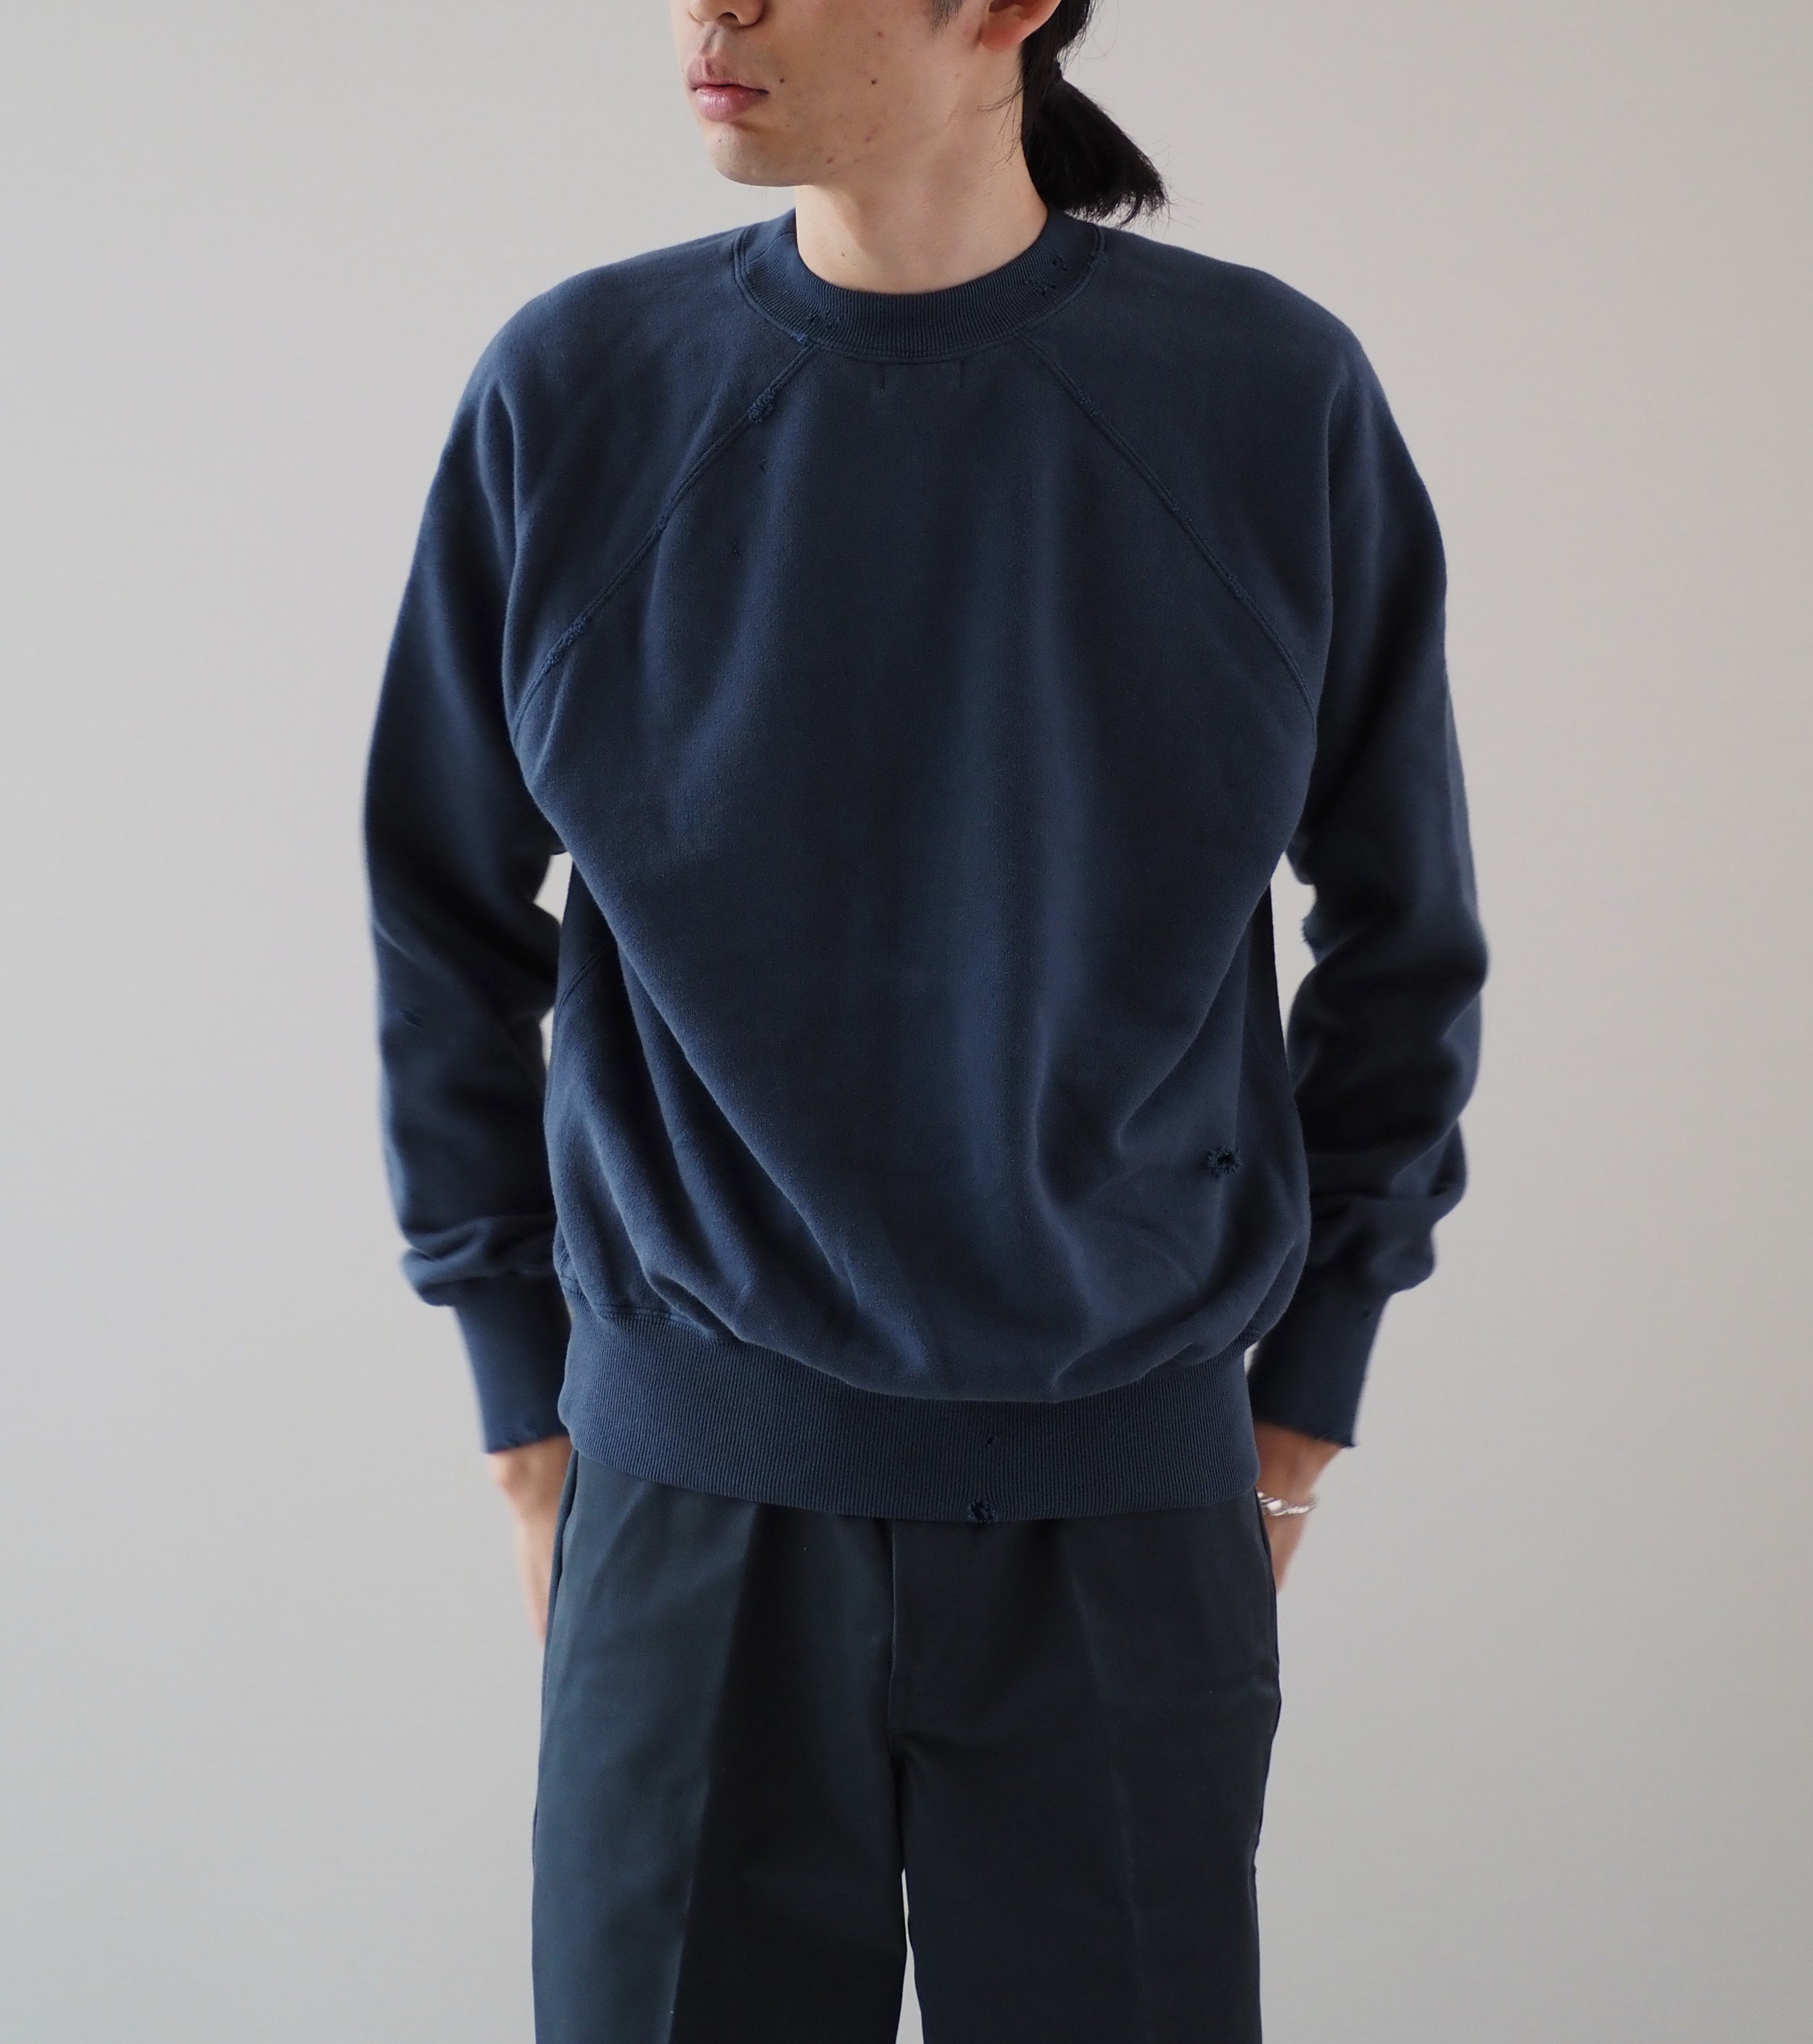 MAATEE＆SONS ヴィンテージ スウェット , 掠れ Navy – Navyblue